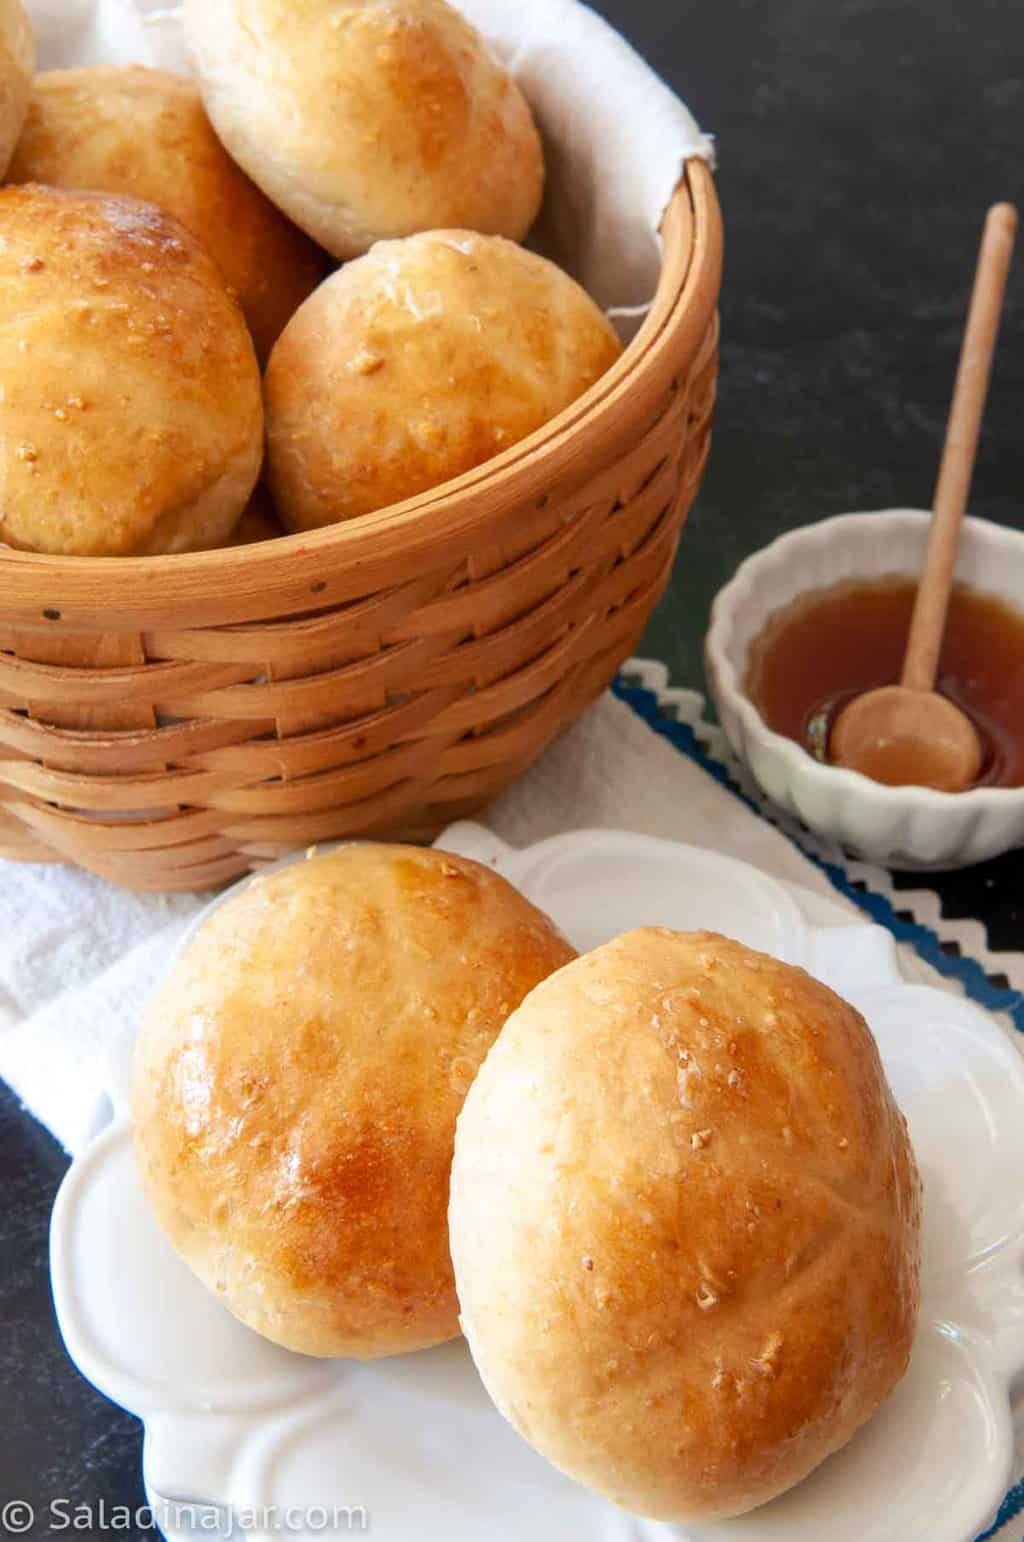 Honey-Kissed Oatmeal Rolls in a basket with honey on the side.